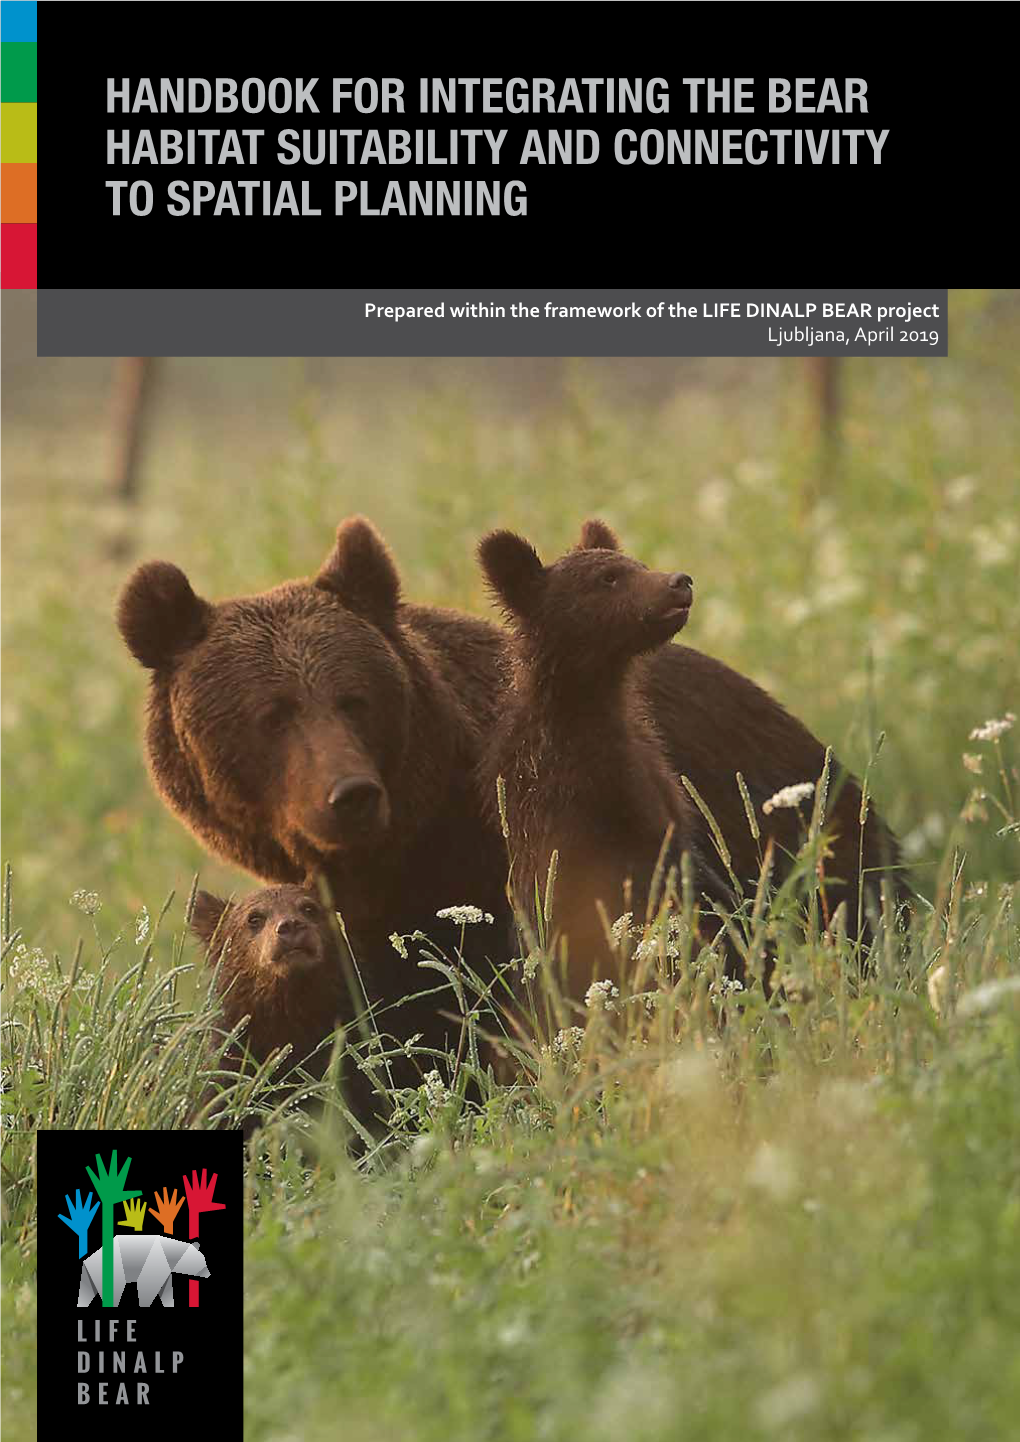 Handbook for Integrating the Bear Habitat Suitability and Connectivity to Spatial Planning